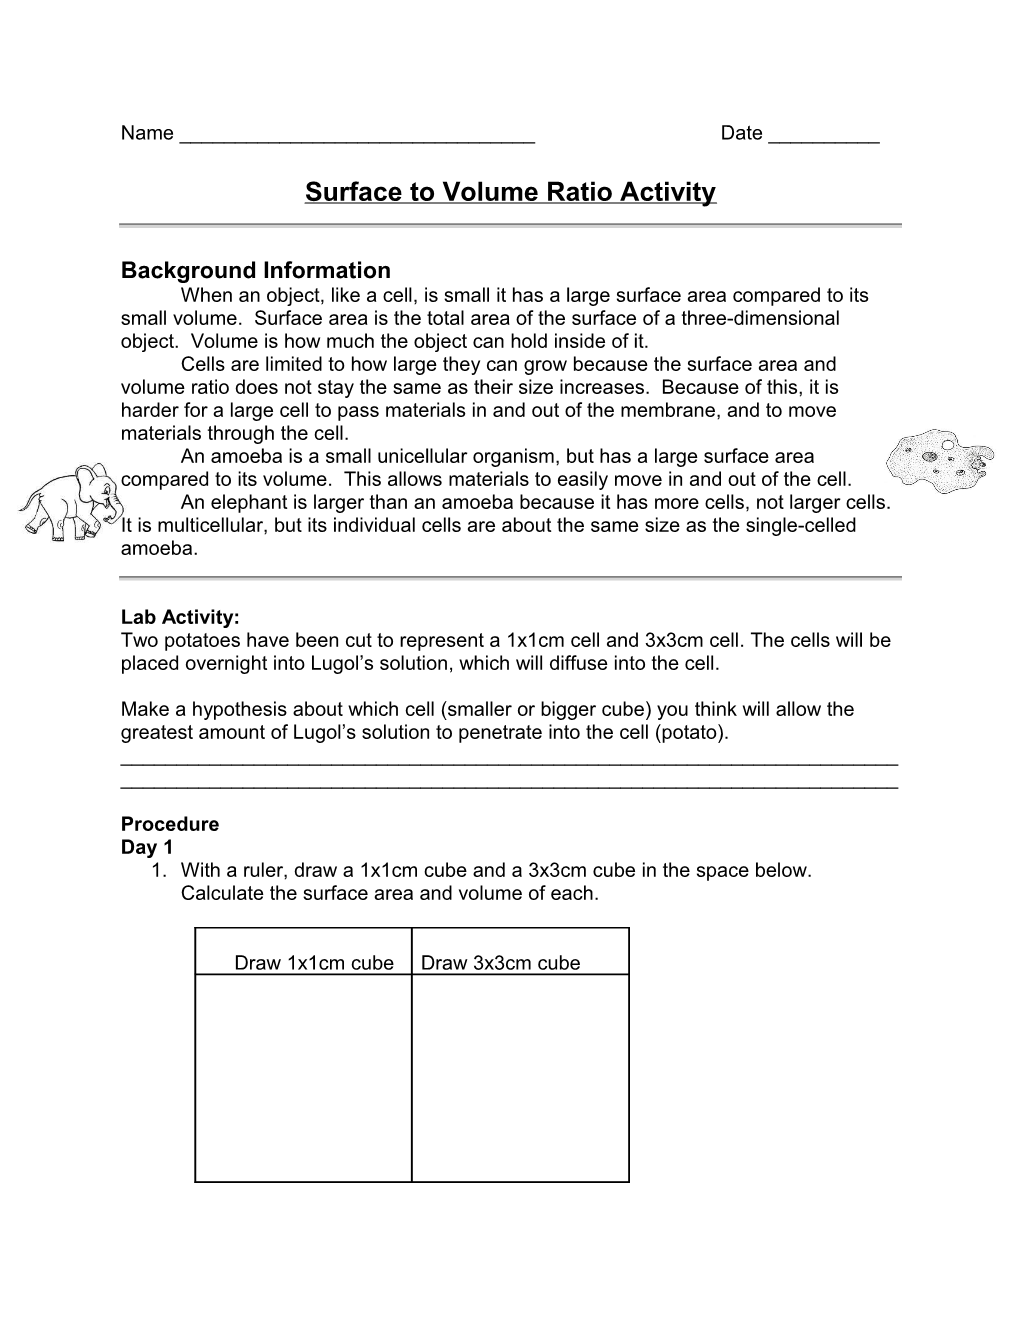 Surface to Volume Ratio Activity